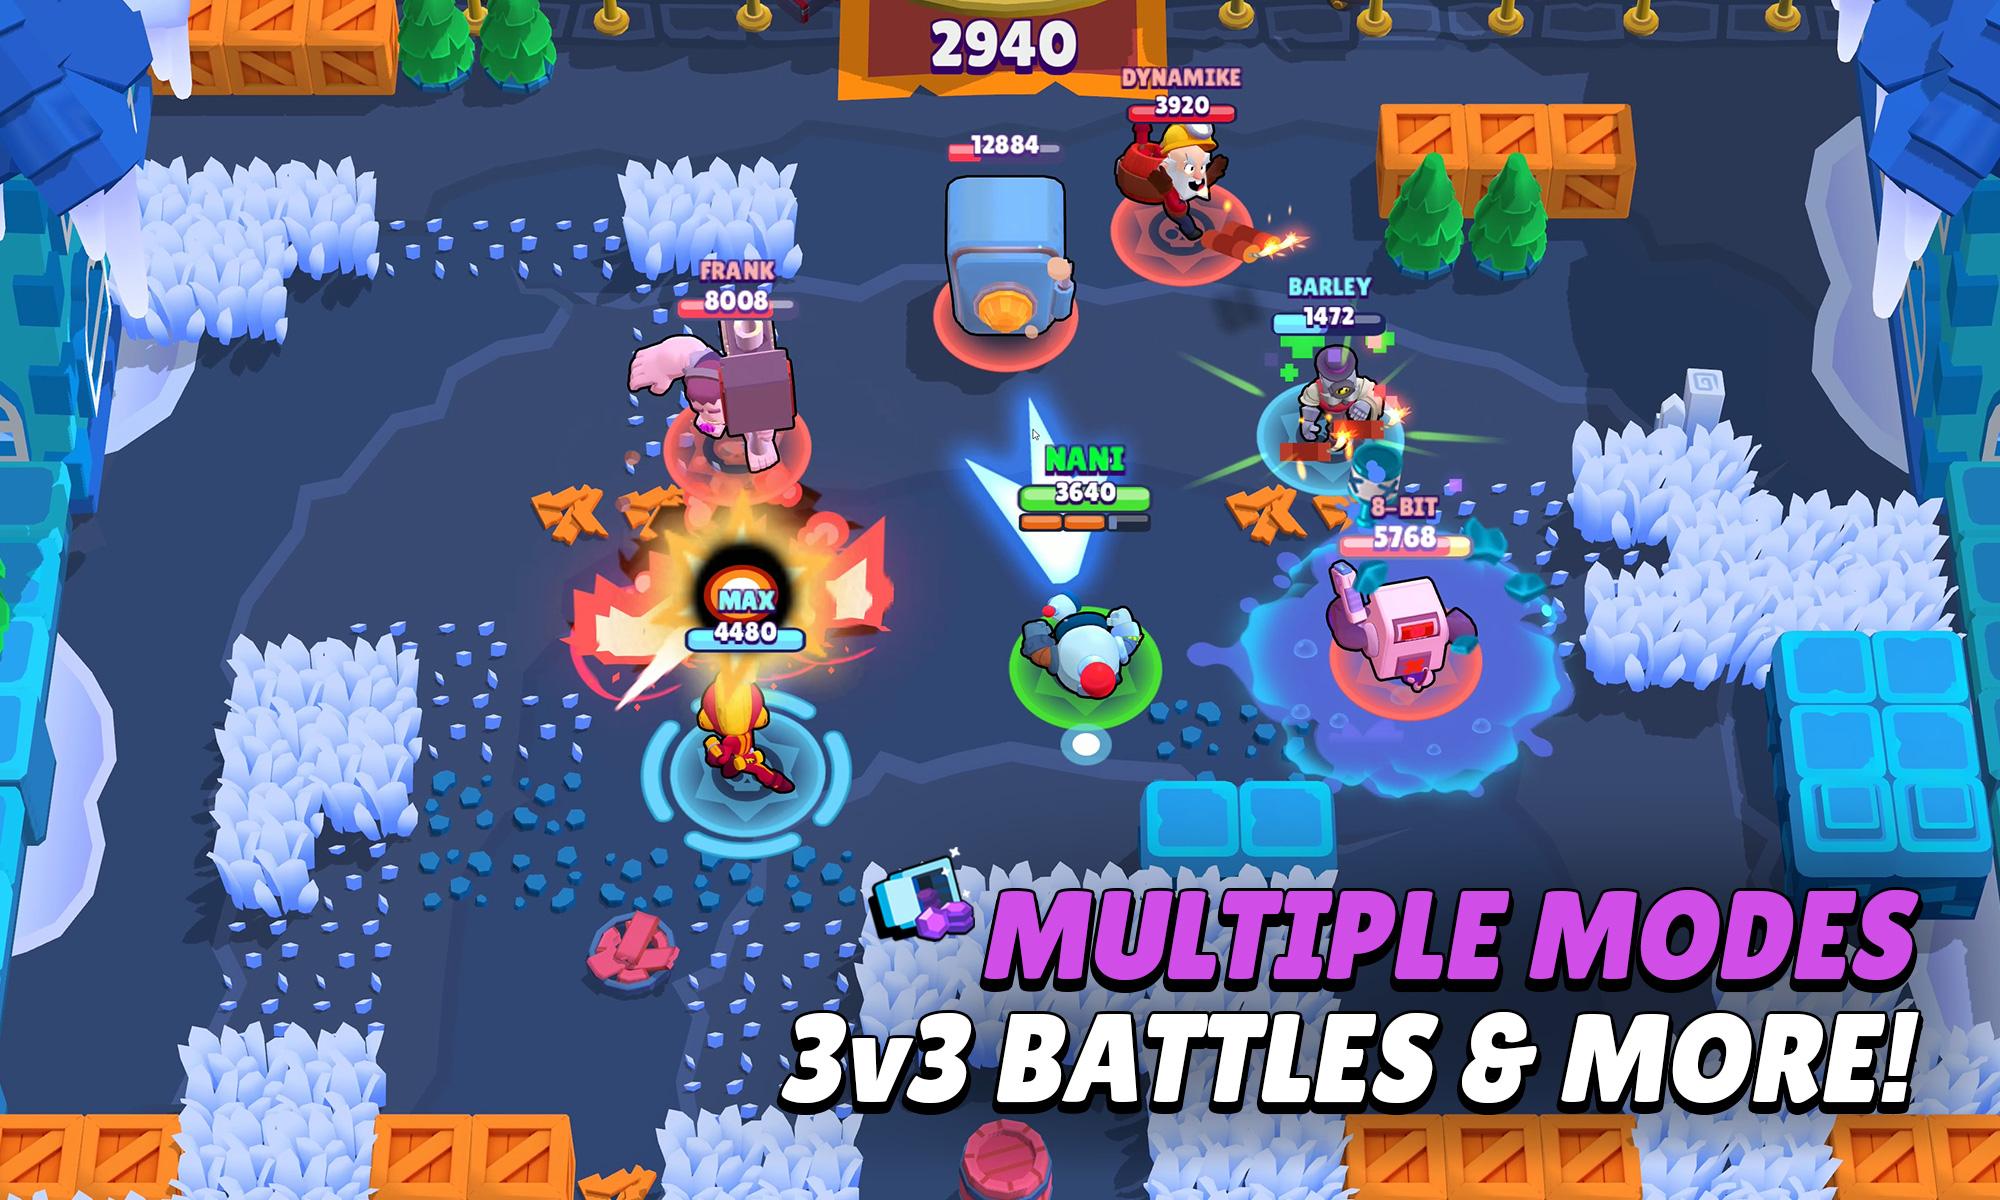 Brawl Stars Apk Download Pick Up Your Hero Characters In 3v3 Smash And Grab Mode Brock Shelly Jessie And Barley - brawl stars apk for android 4.2